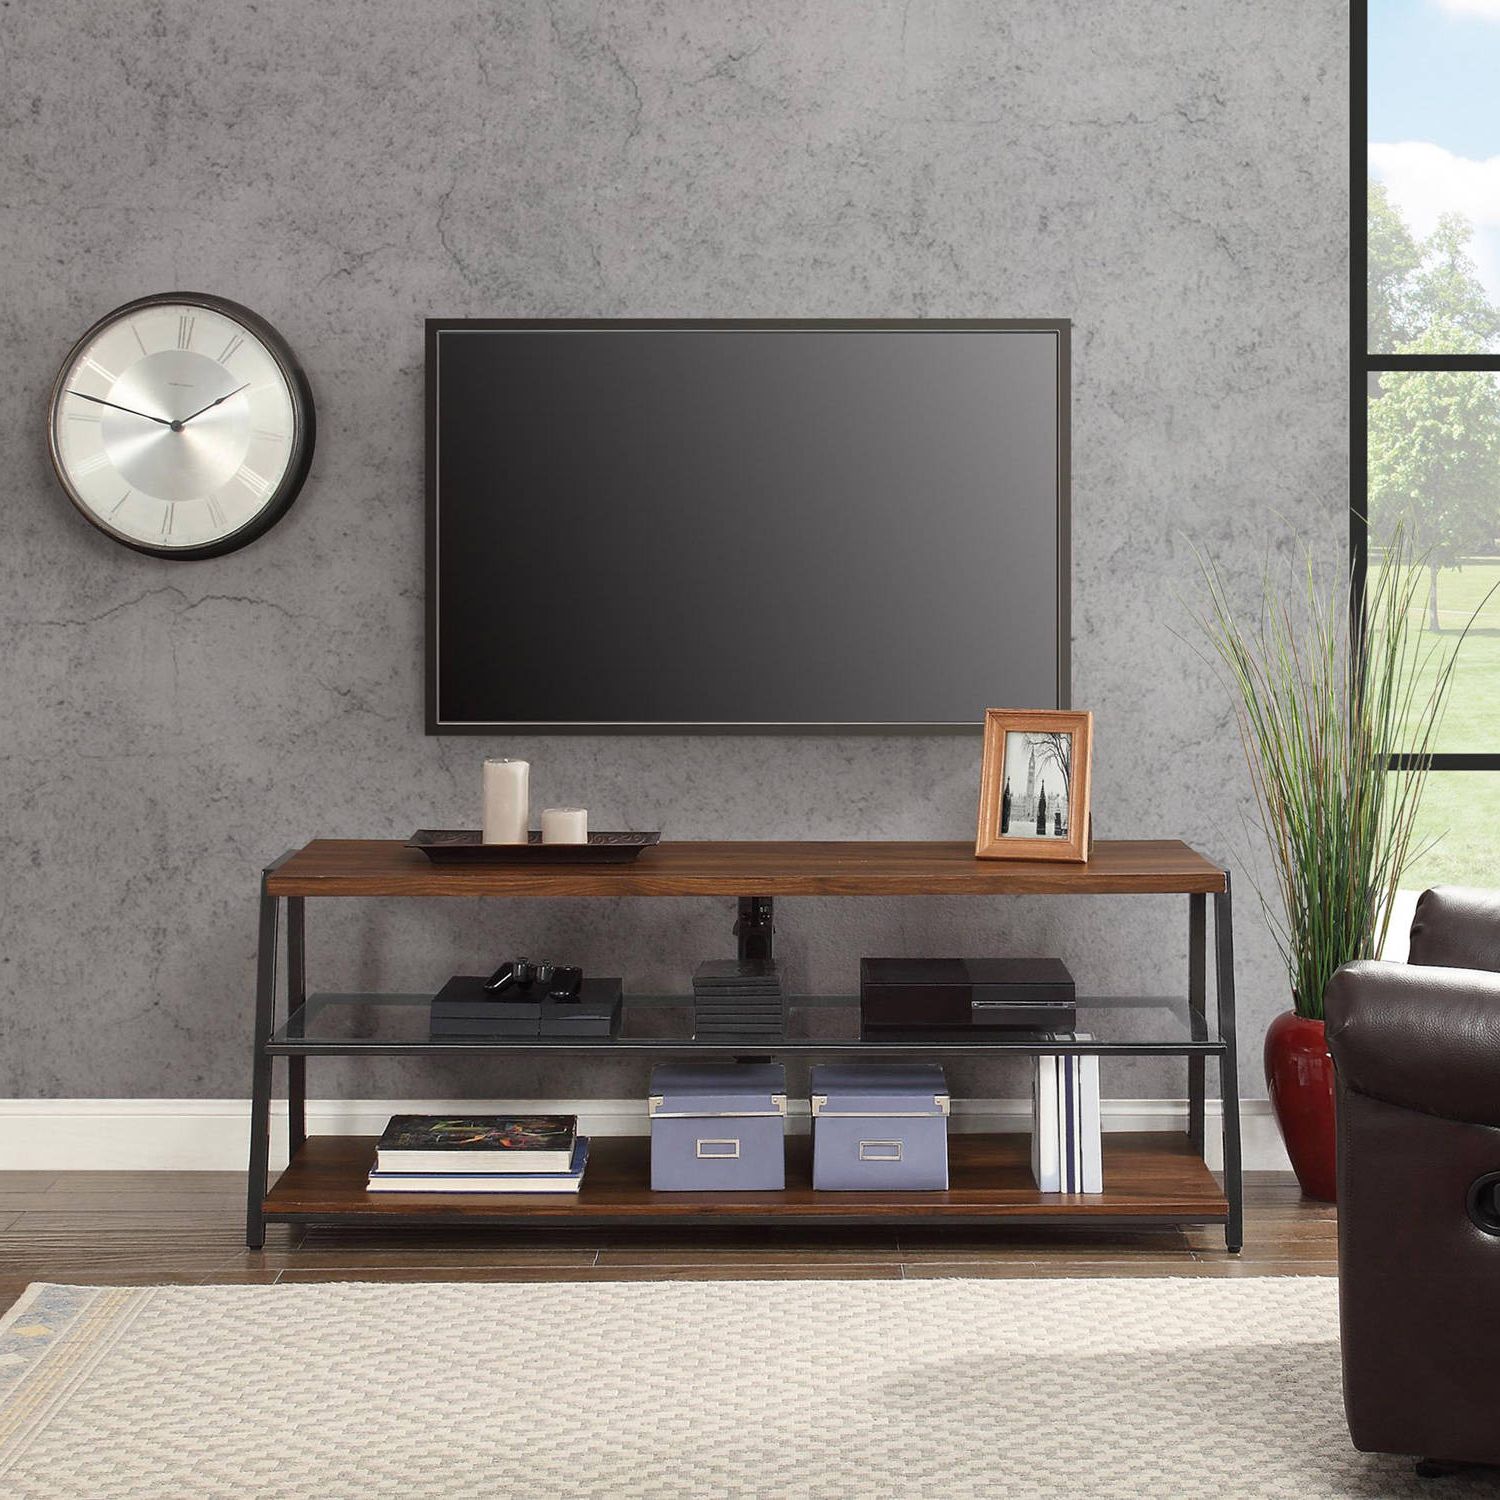 Mainstays Arris 3 In 1 Tv Stand For Televisions Up To 70 With Mainstays Arris 3 In 1 Tv Stands In Canyon Walnut Finish (Gallery 4 of 20)